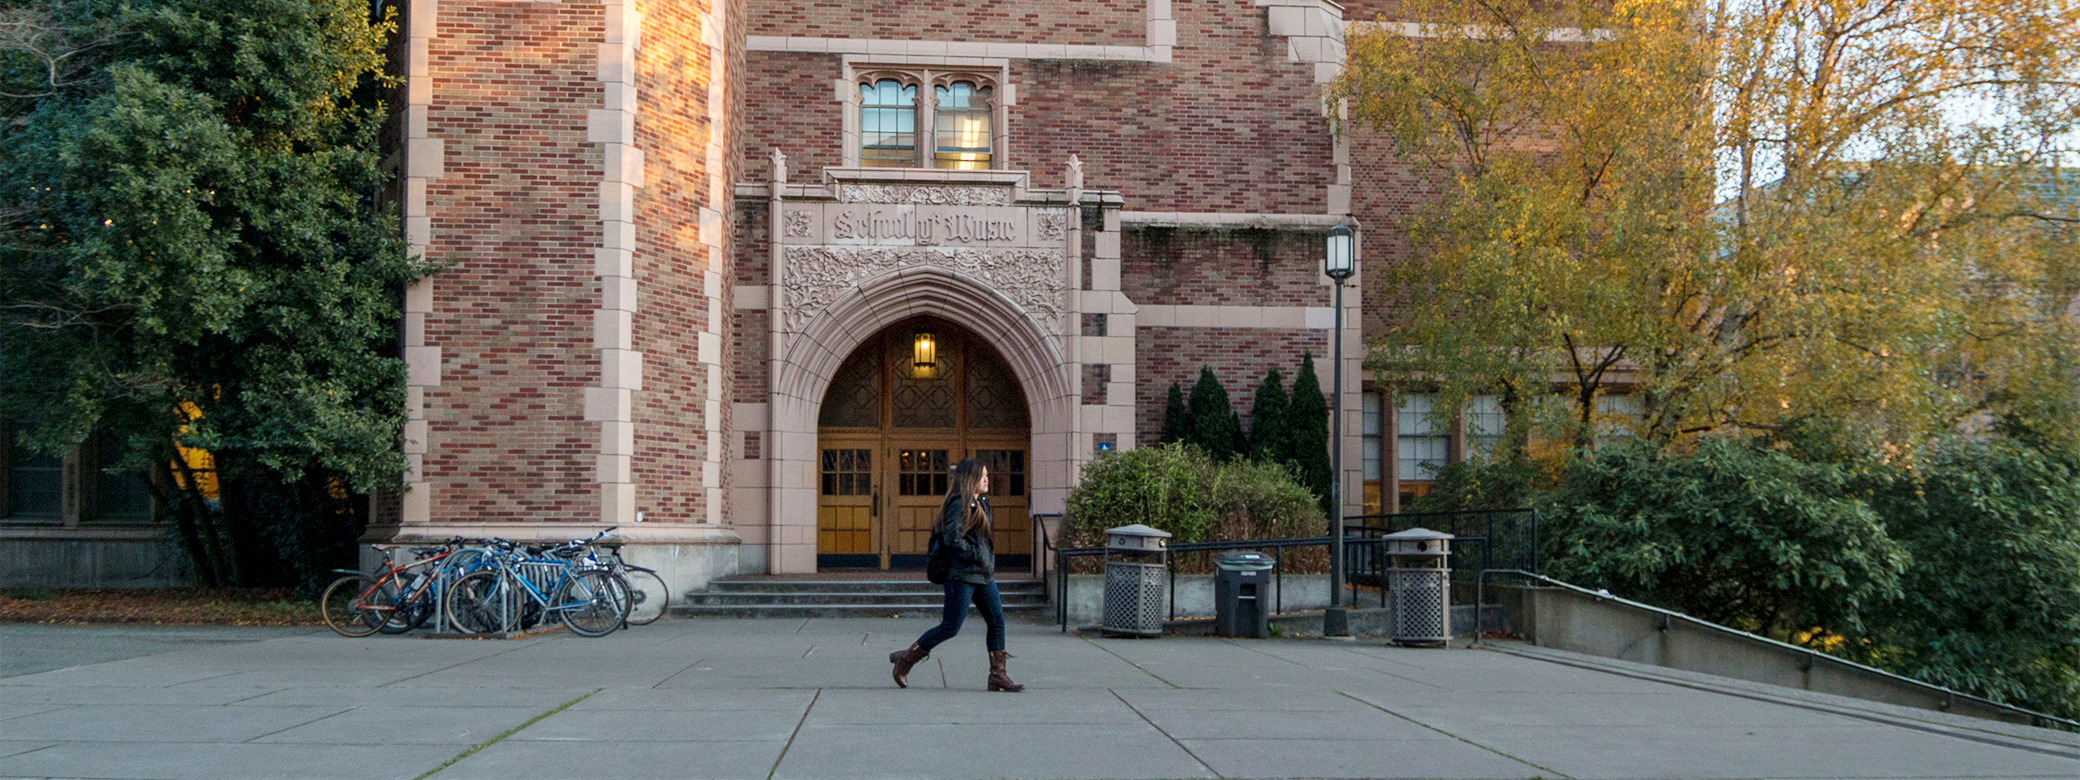 A student walking outside the entrance to the UW School of Music building.